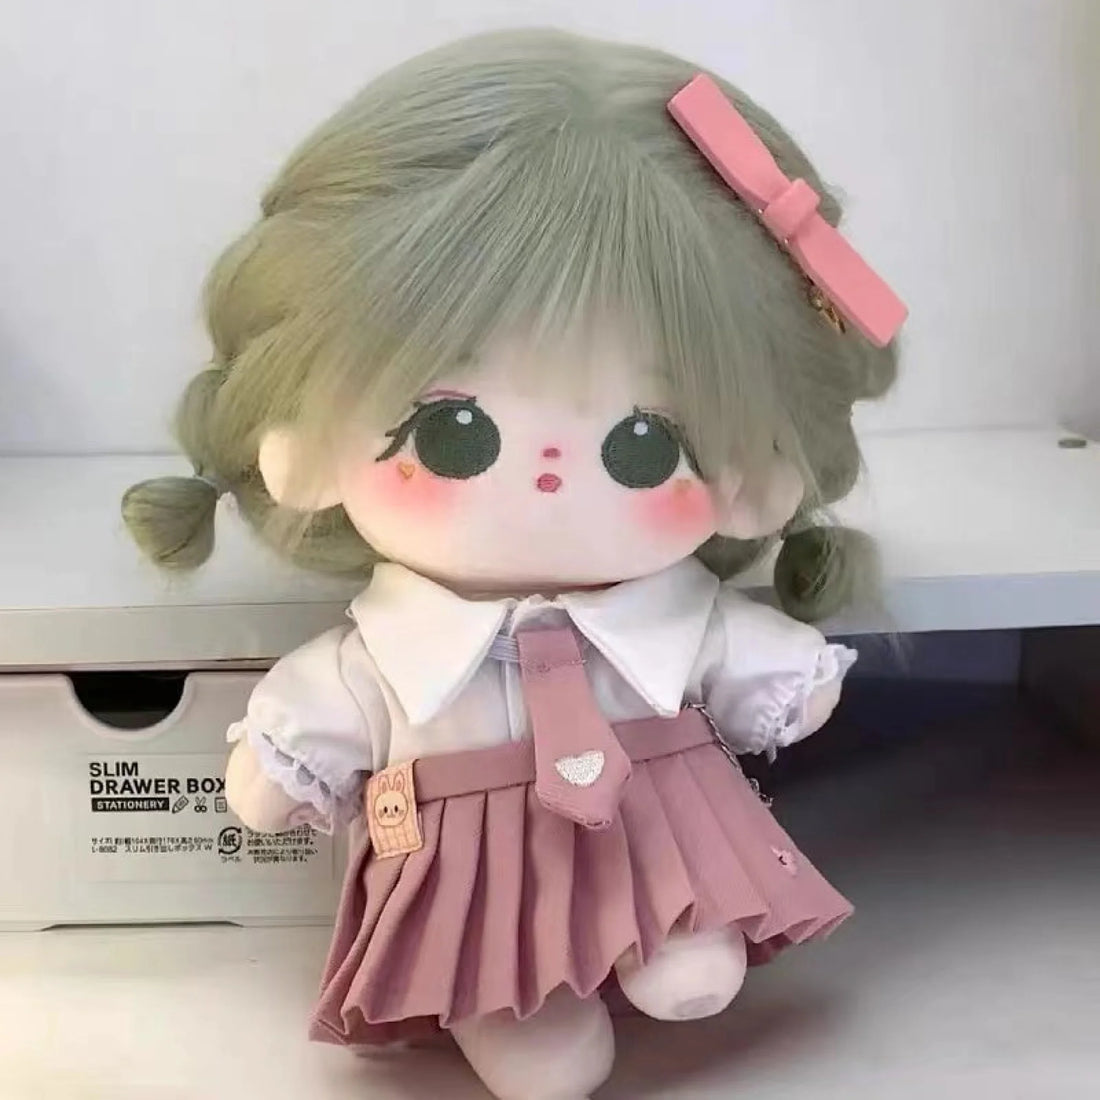 20Cm Cotton Doll Plush Clothes Cute Outfit For Dolls